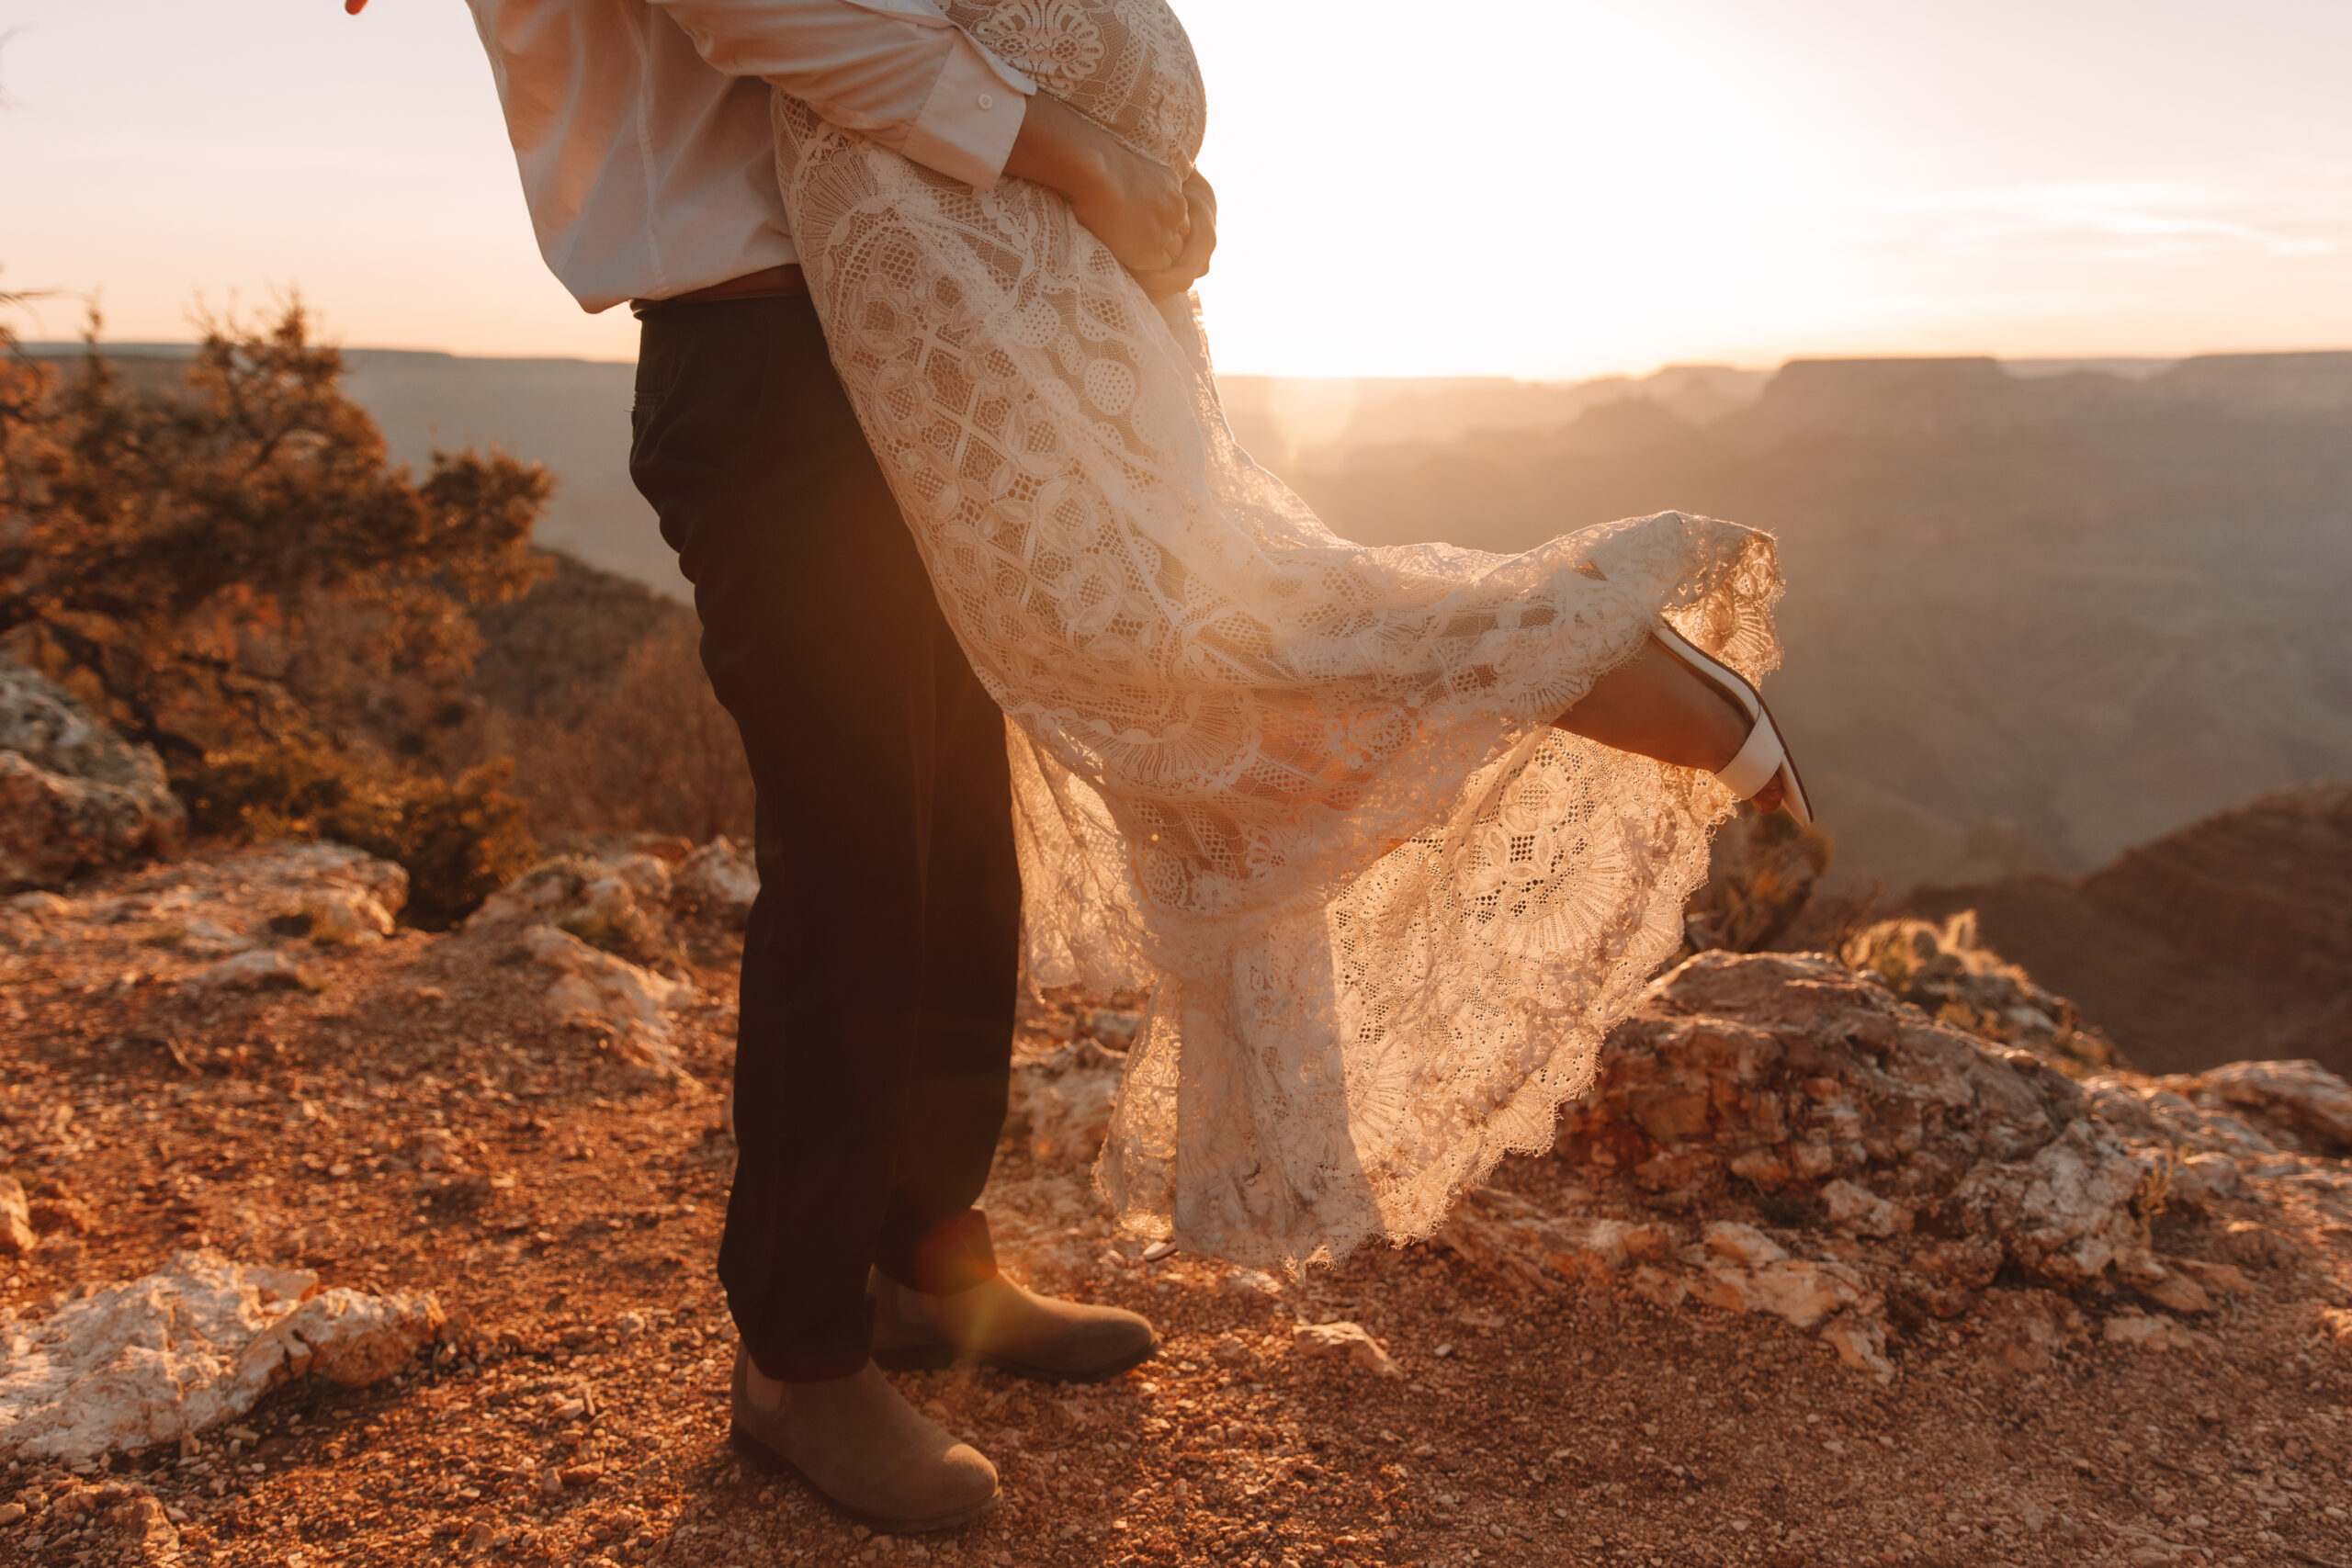 A close up shot of the bottom halves of a groom picking up his bride as she kicks her leg back. The sun shines through her lace wedding dress and her white high heel shoes are visible